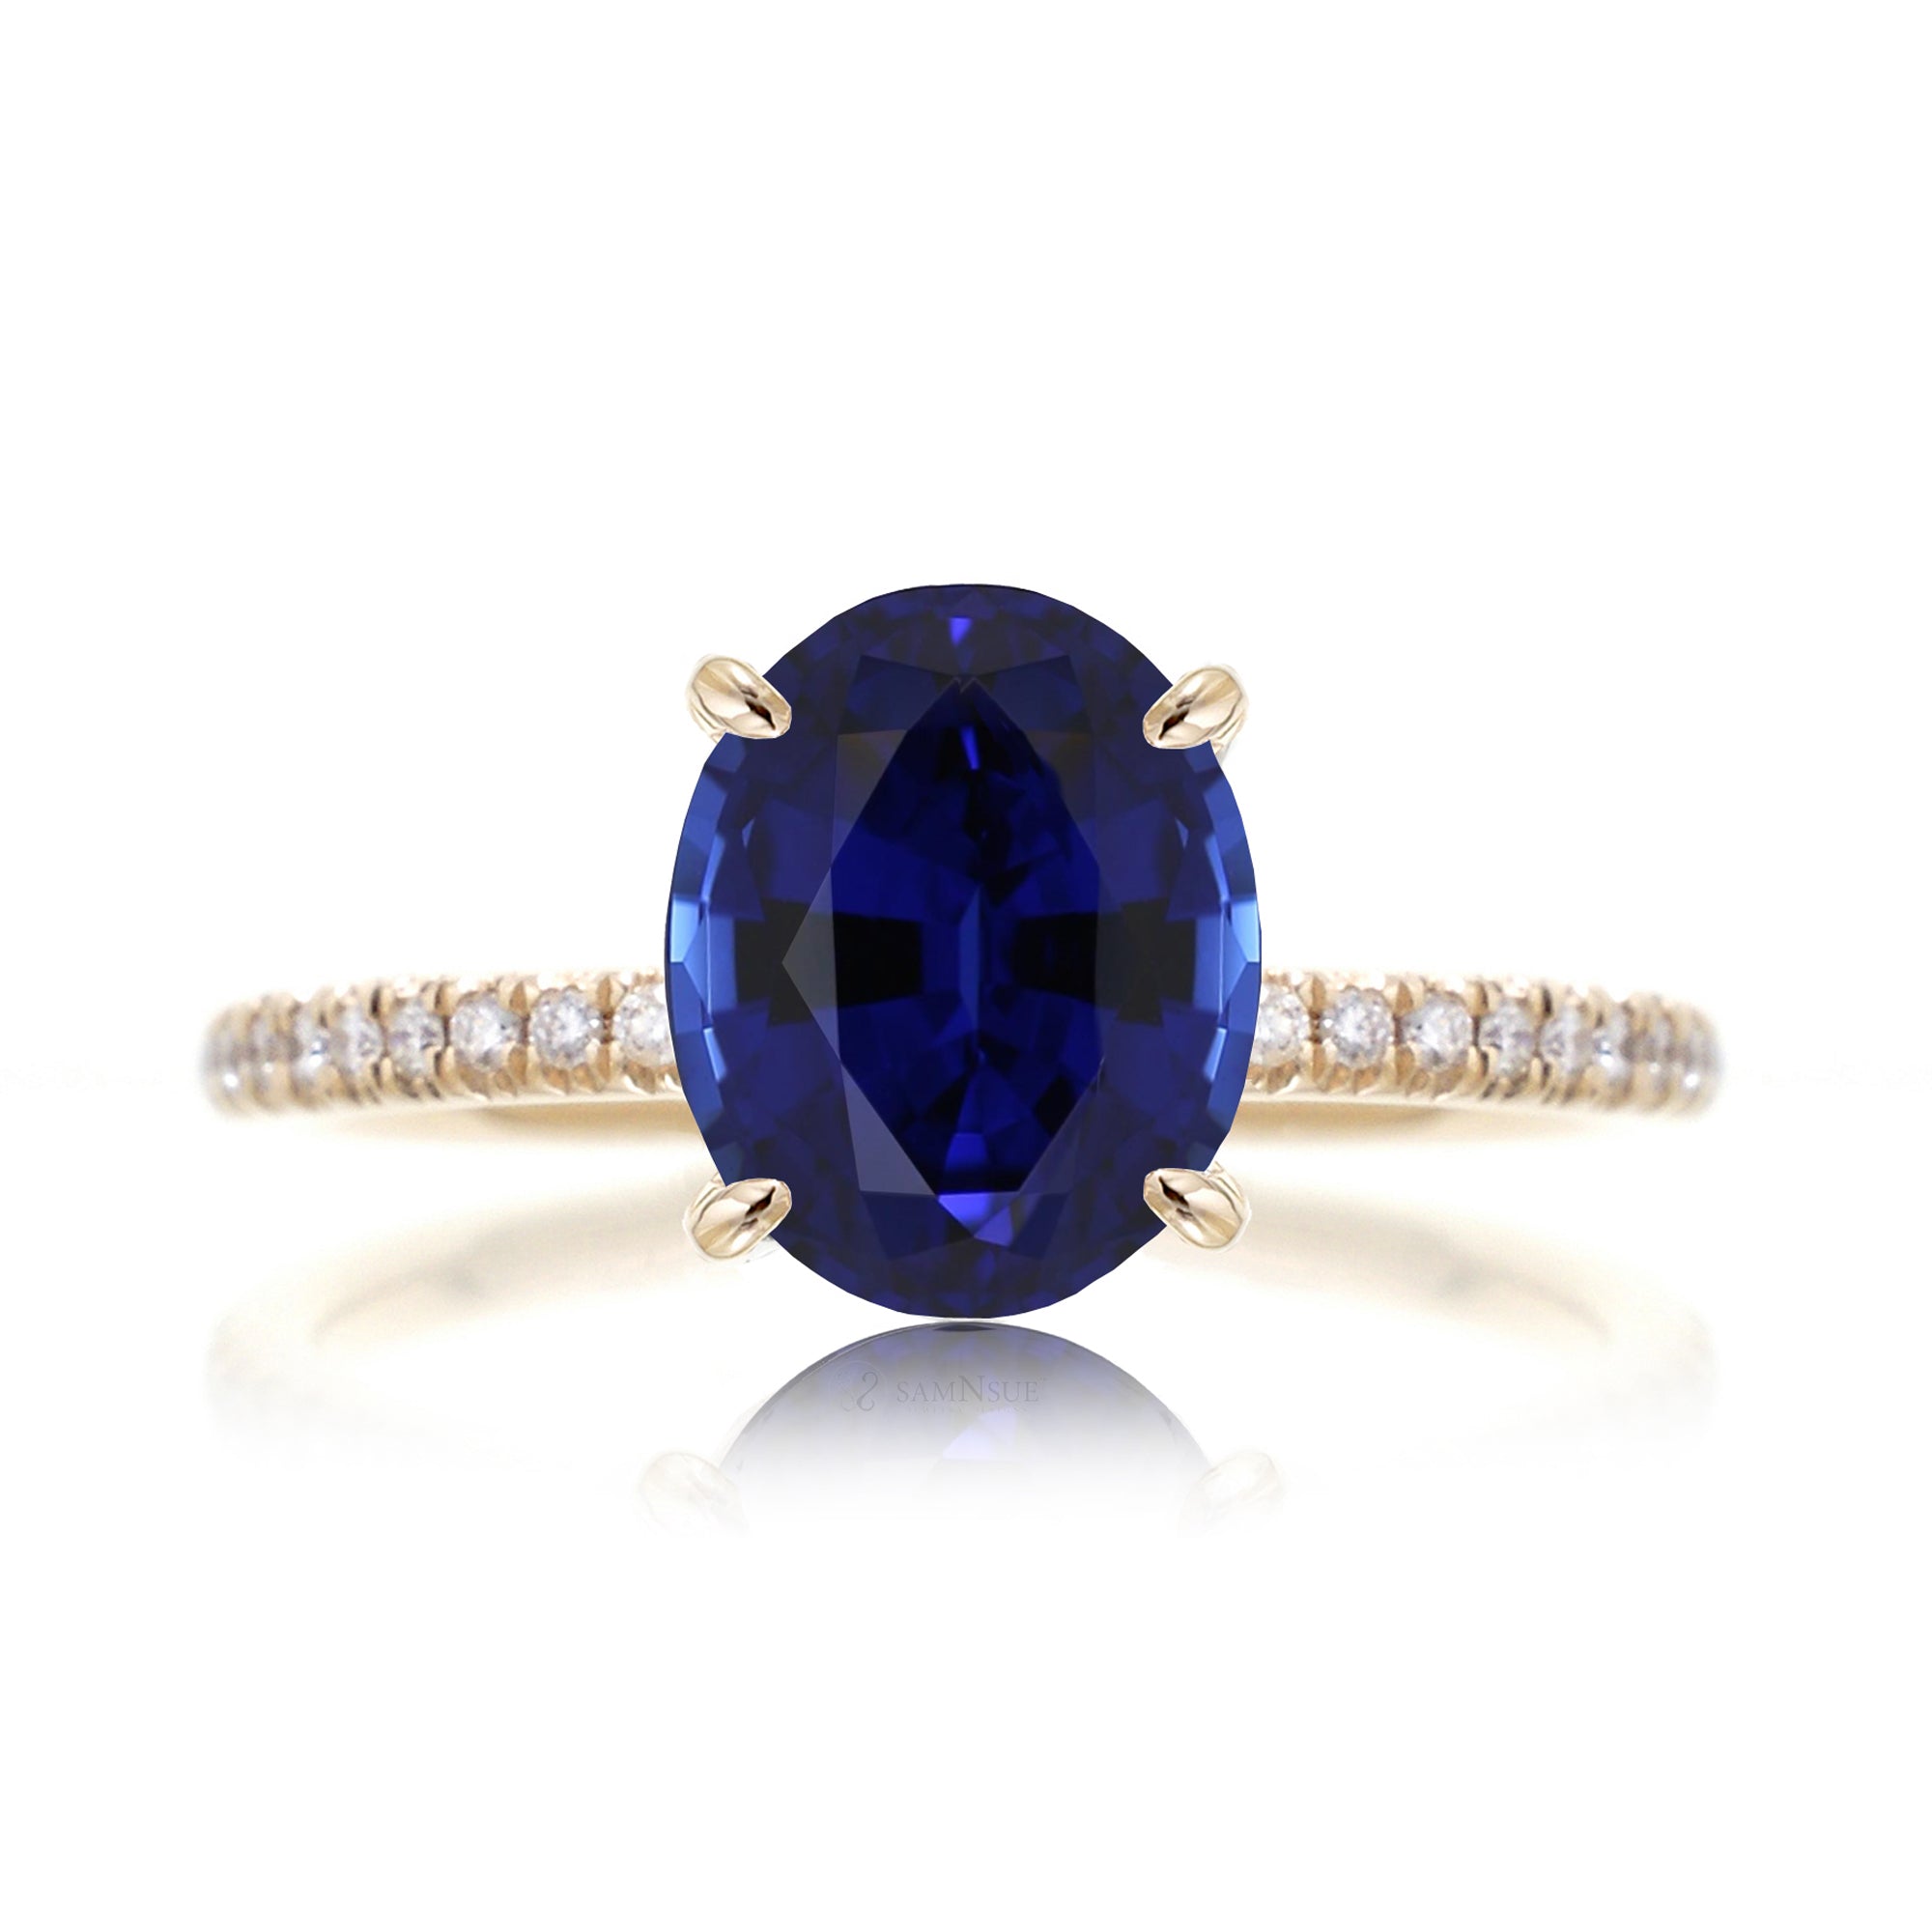 Oval blue sapphire diamond band engagement ring yellow gold - the Ava